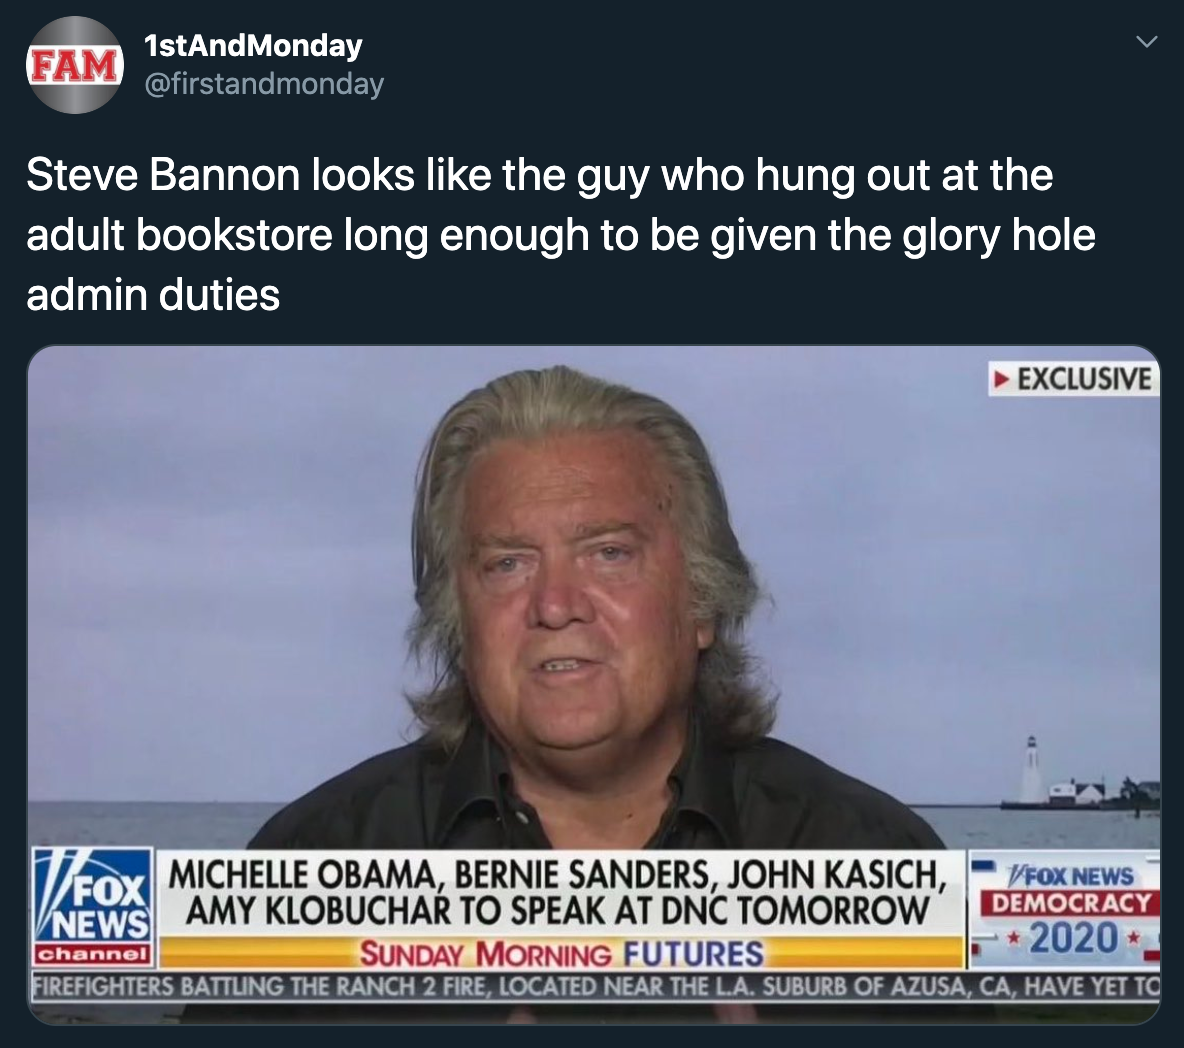 Steve Bannon looks like the guy who hung out at the adult bookstore long enough to be given the glory hole admin duties